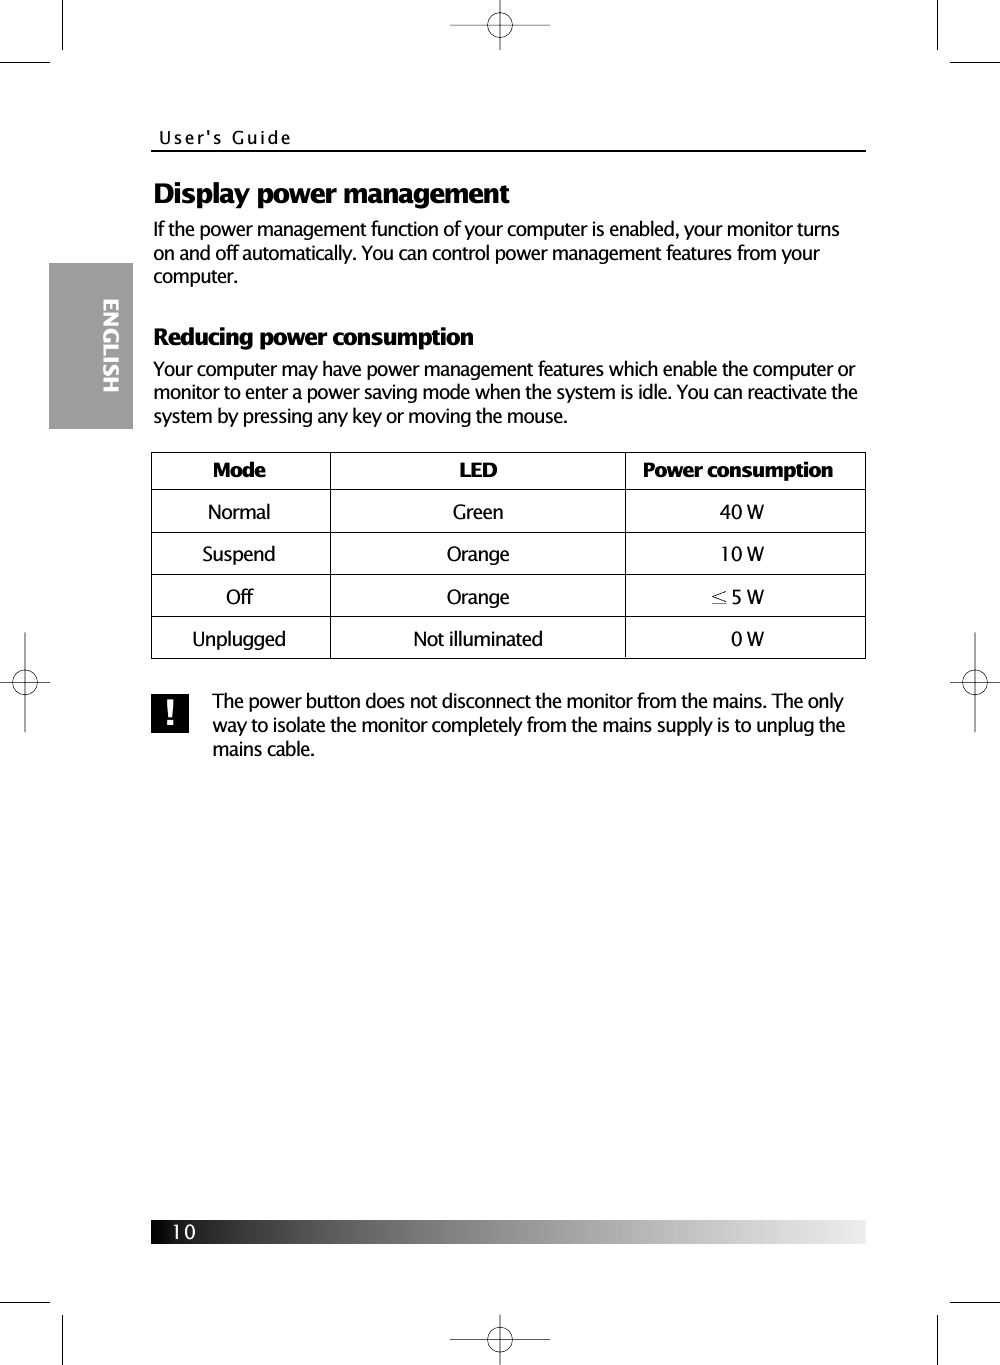 User&apos;s Guide  ENGLISH10Display power managementIf the power management function of your computer is enabled, your monitor turnson and off automatically. You can control power management features from yourcomputer.Reducing power consumptionYour computer may have power management features which enable the computer ormonitor to enter a power saving mode when the system is idle. You can reactivate thesystem by pressing any key or moving the mouse.The power button does not disconnect the monitor from the mains. The onlyway to isolate the monitor completely from the mains supply is to unplug themains cable.Mode LED Power consumptionNormal Green 40 WSuspend Orange 10 WOff Orange 5 WUnplugged Not illuminated 0 W!